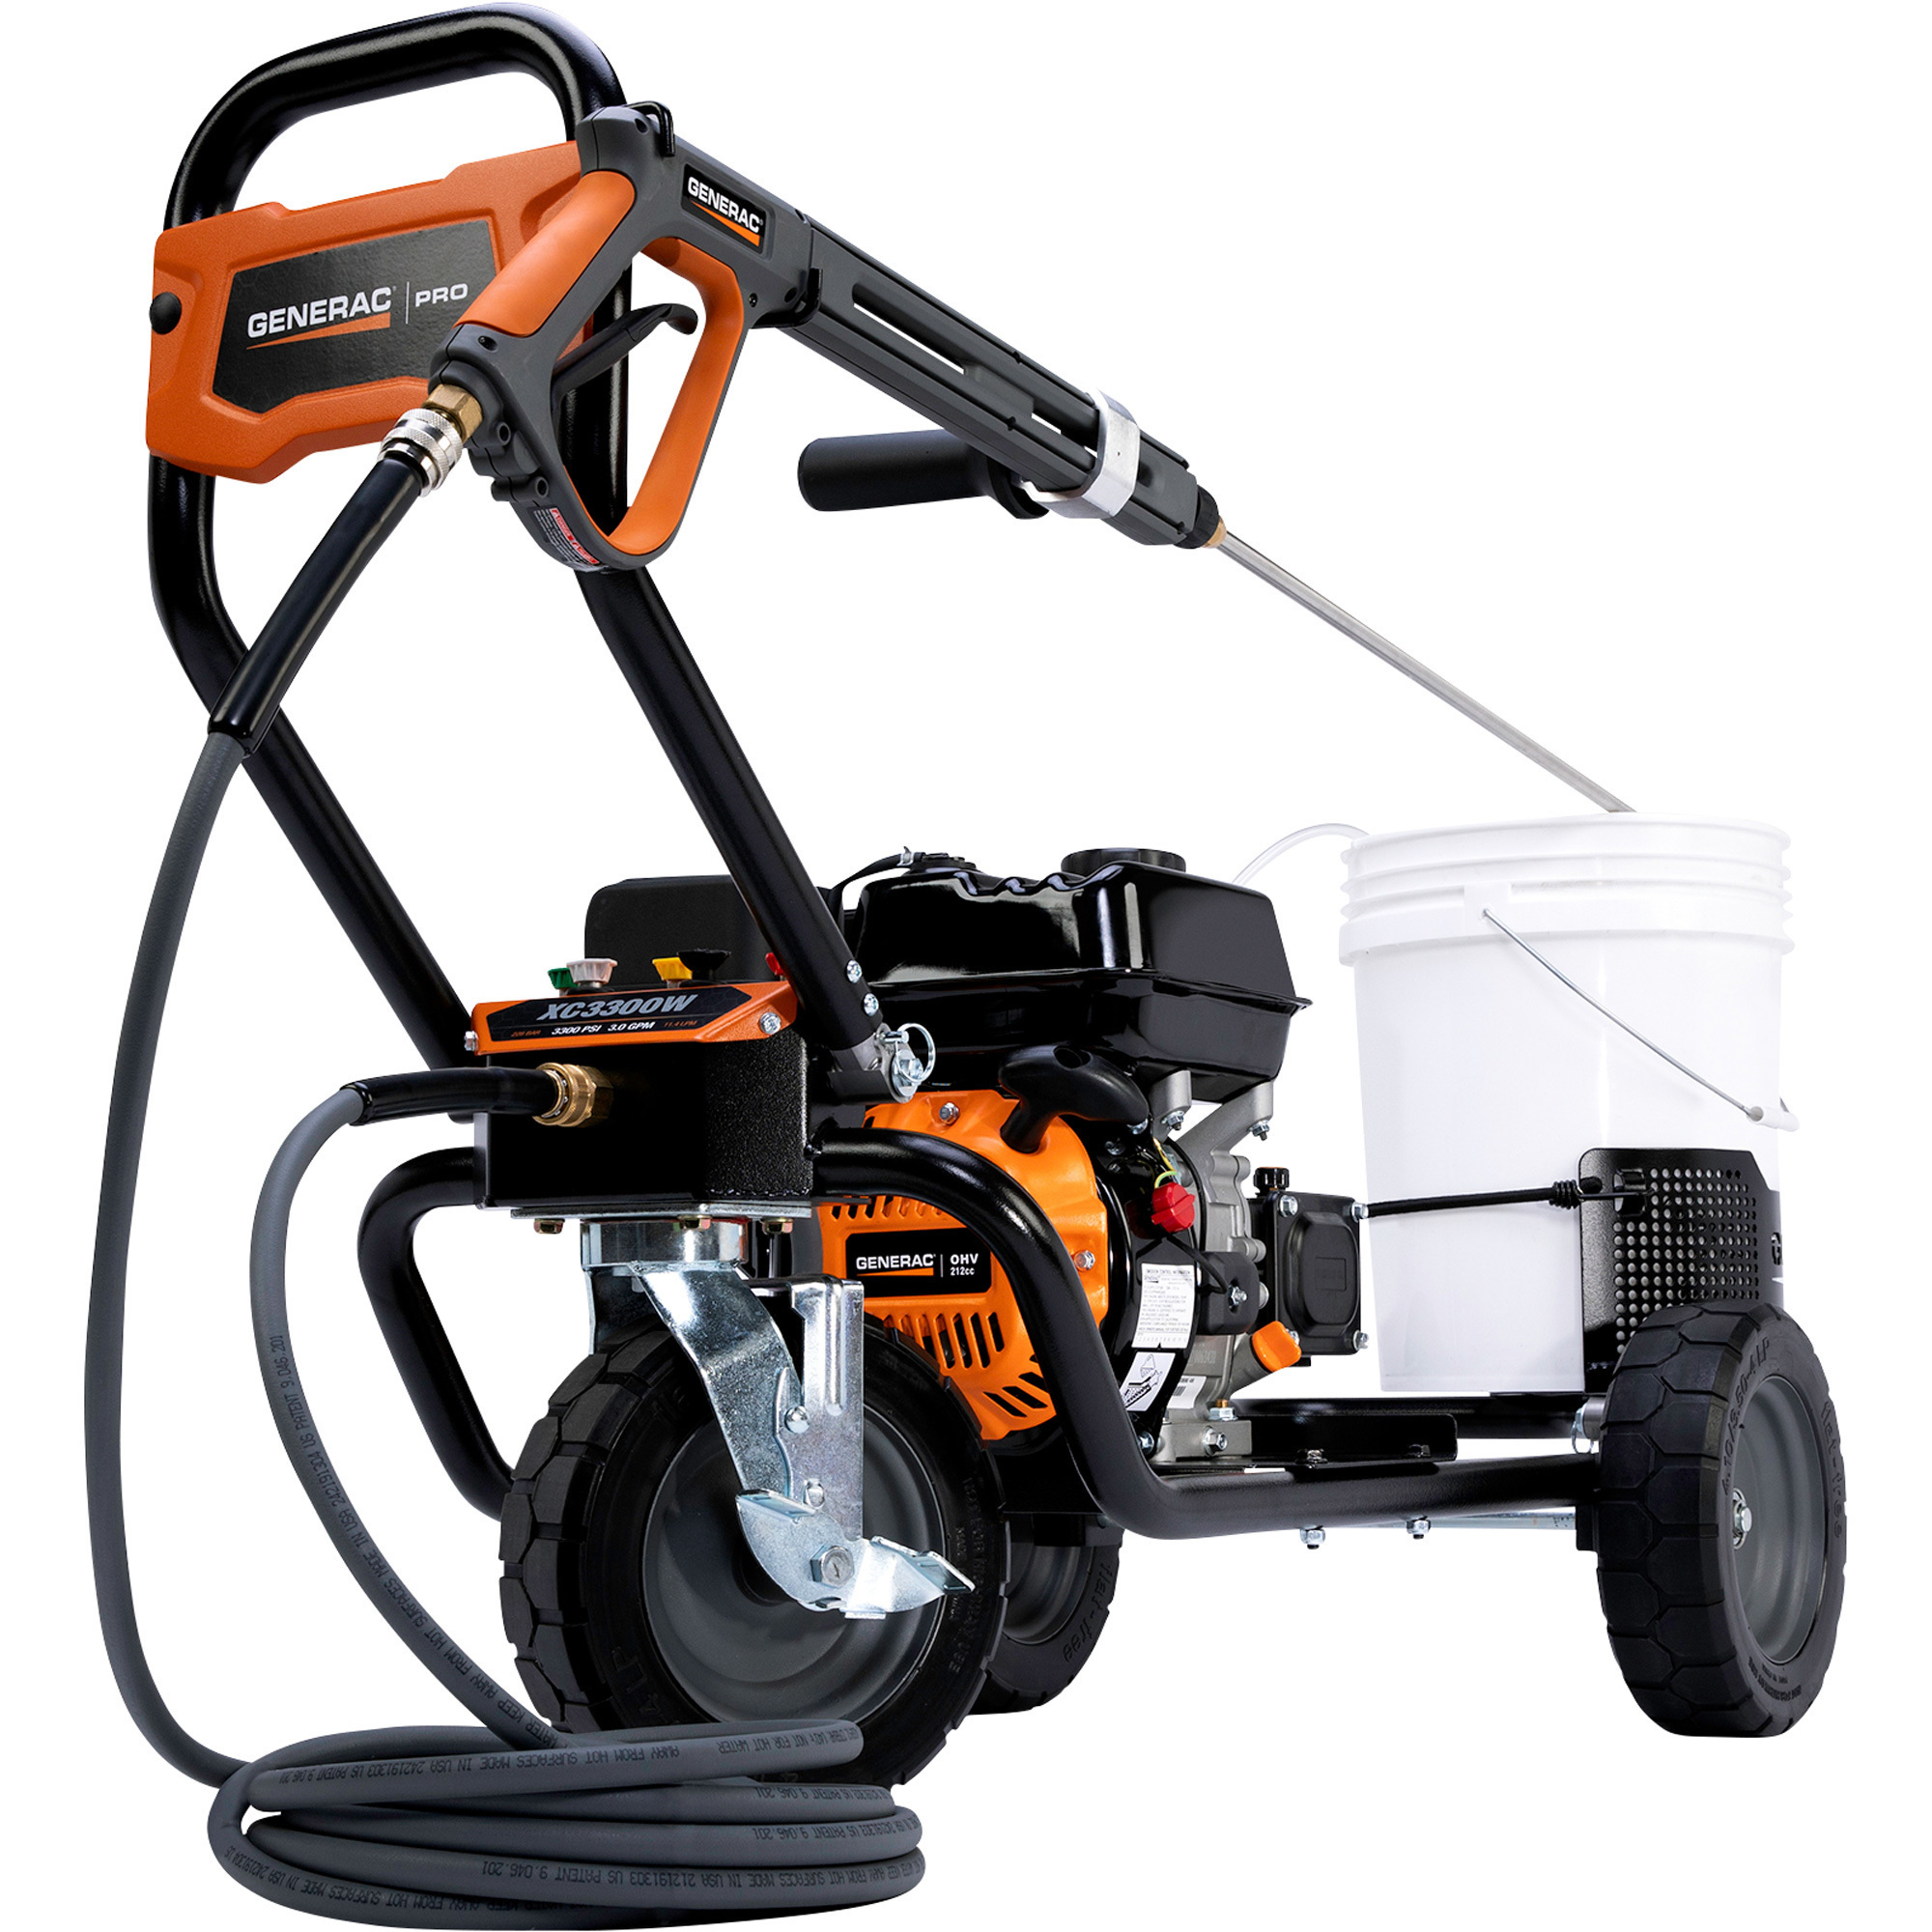 Generac XC Series Gas Cold Water Pressure Washer, 3300 PSI, 3.0 GPM, Model 8870